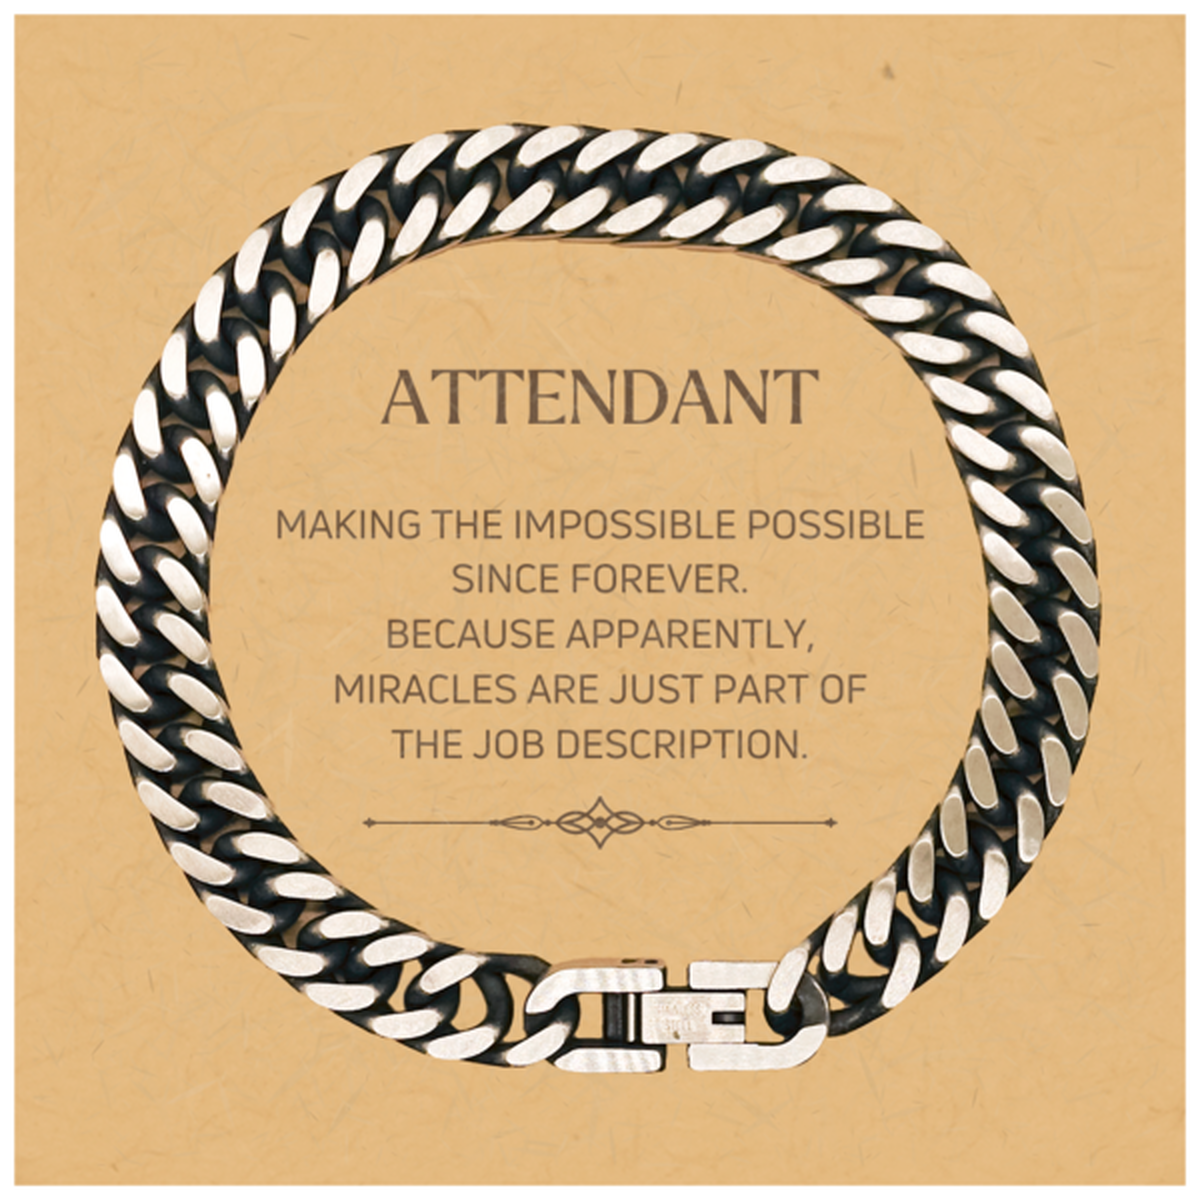 Funny Attendant Gifts, Miracles are just part of the job description, Inspirational Birthday Christmas Cuban Link Chain Bracelet For Attendant, Men, Women, Coworkers, Friends, Boss